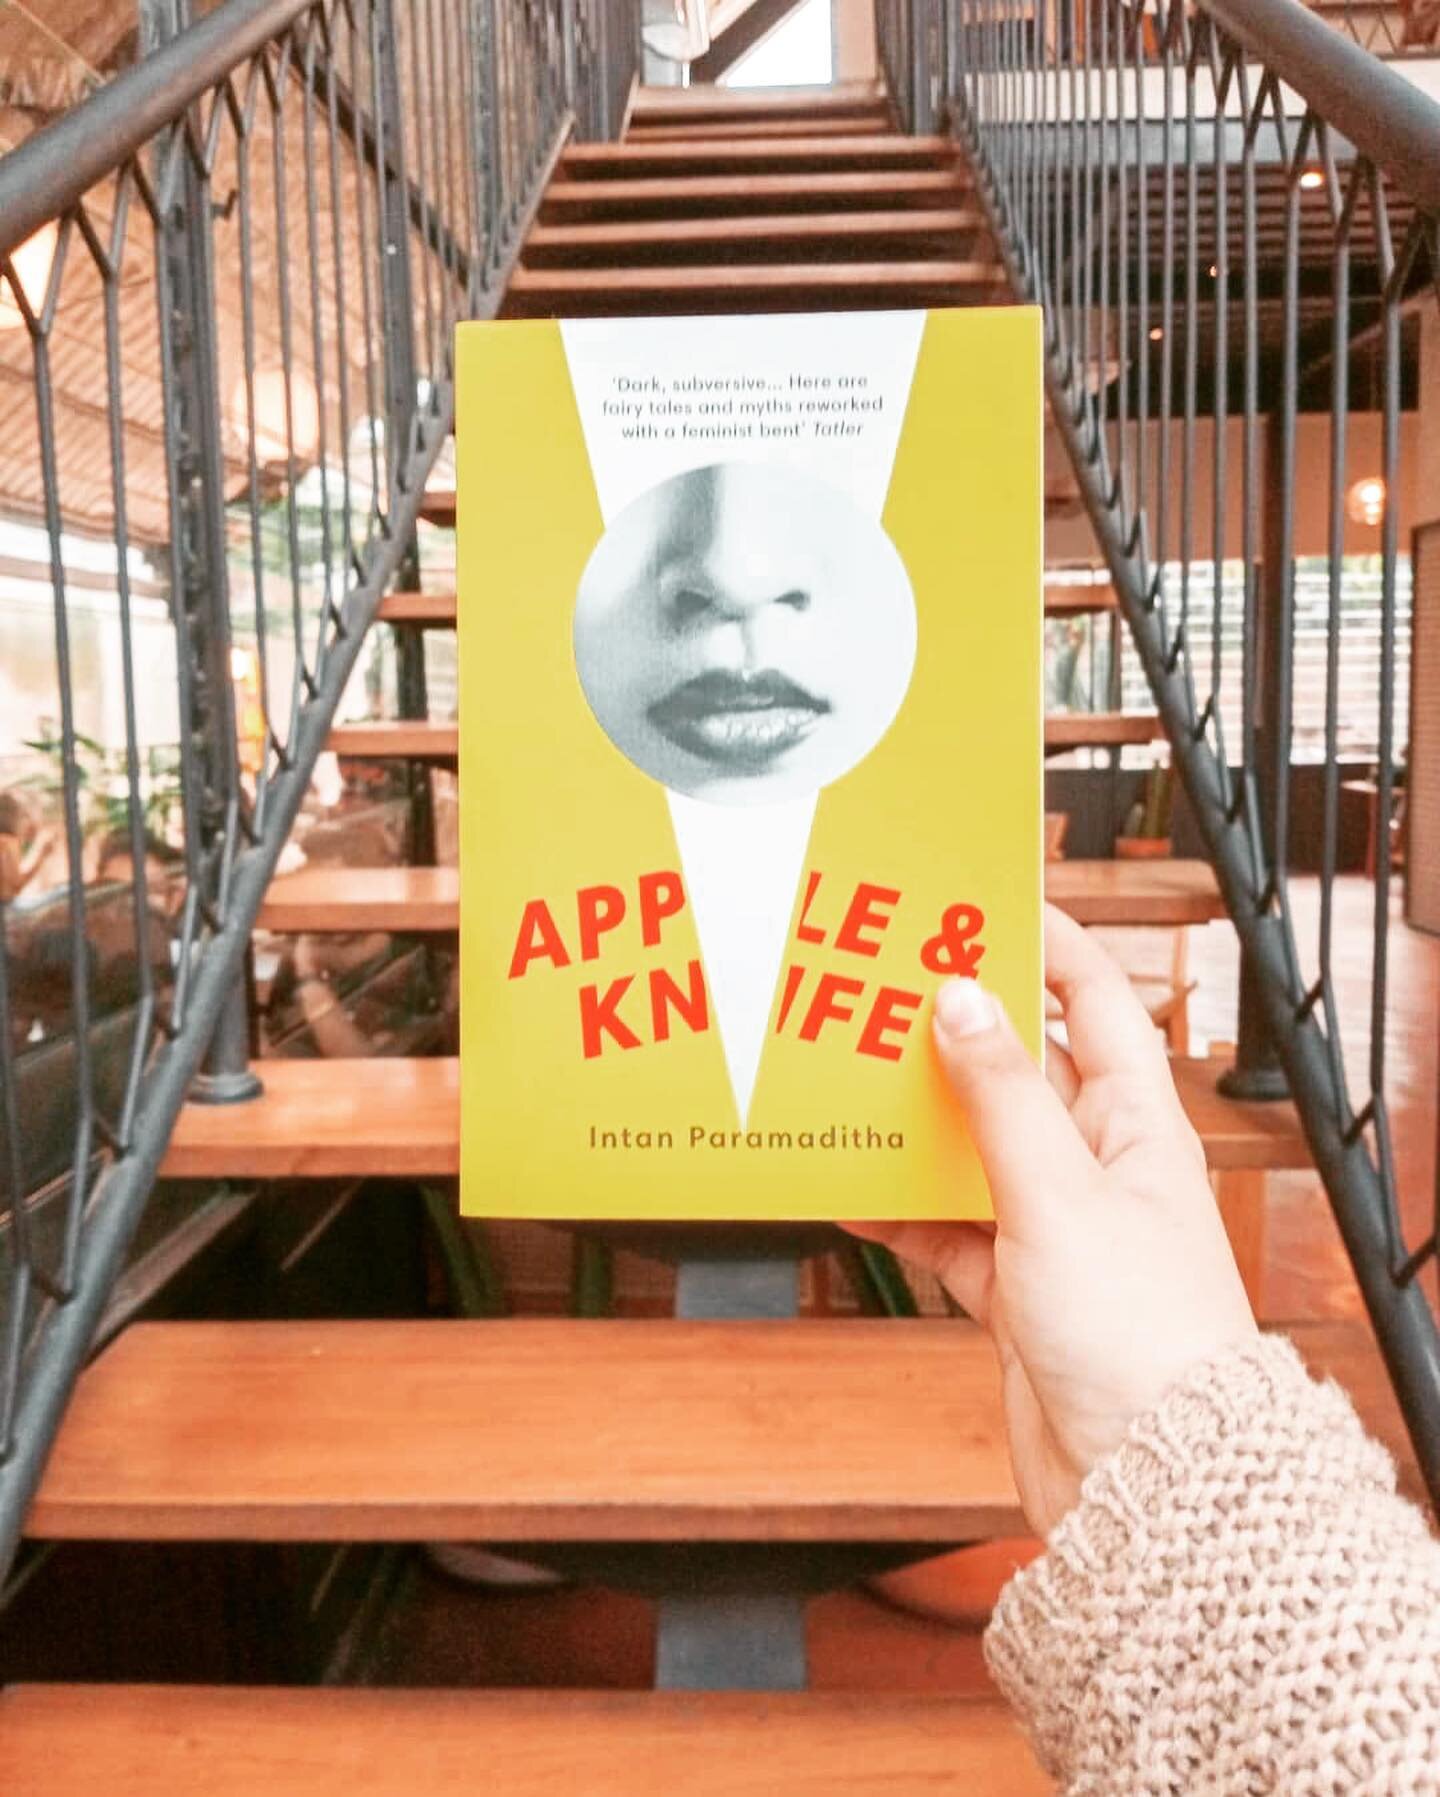 Thank you @shabrinareads. I enjoyed the @thediversiteabookclub book discussion! Posted @withregram &bull; @shabrinareads Apple &amp; Knife by Intan Paramaditha 📚

&quot;Blood and ghosts. I nodded. It made sense. They always showed up together in sto